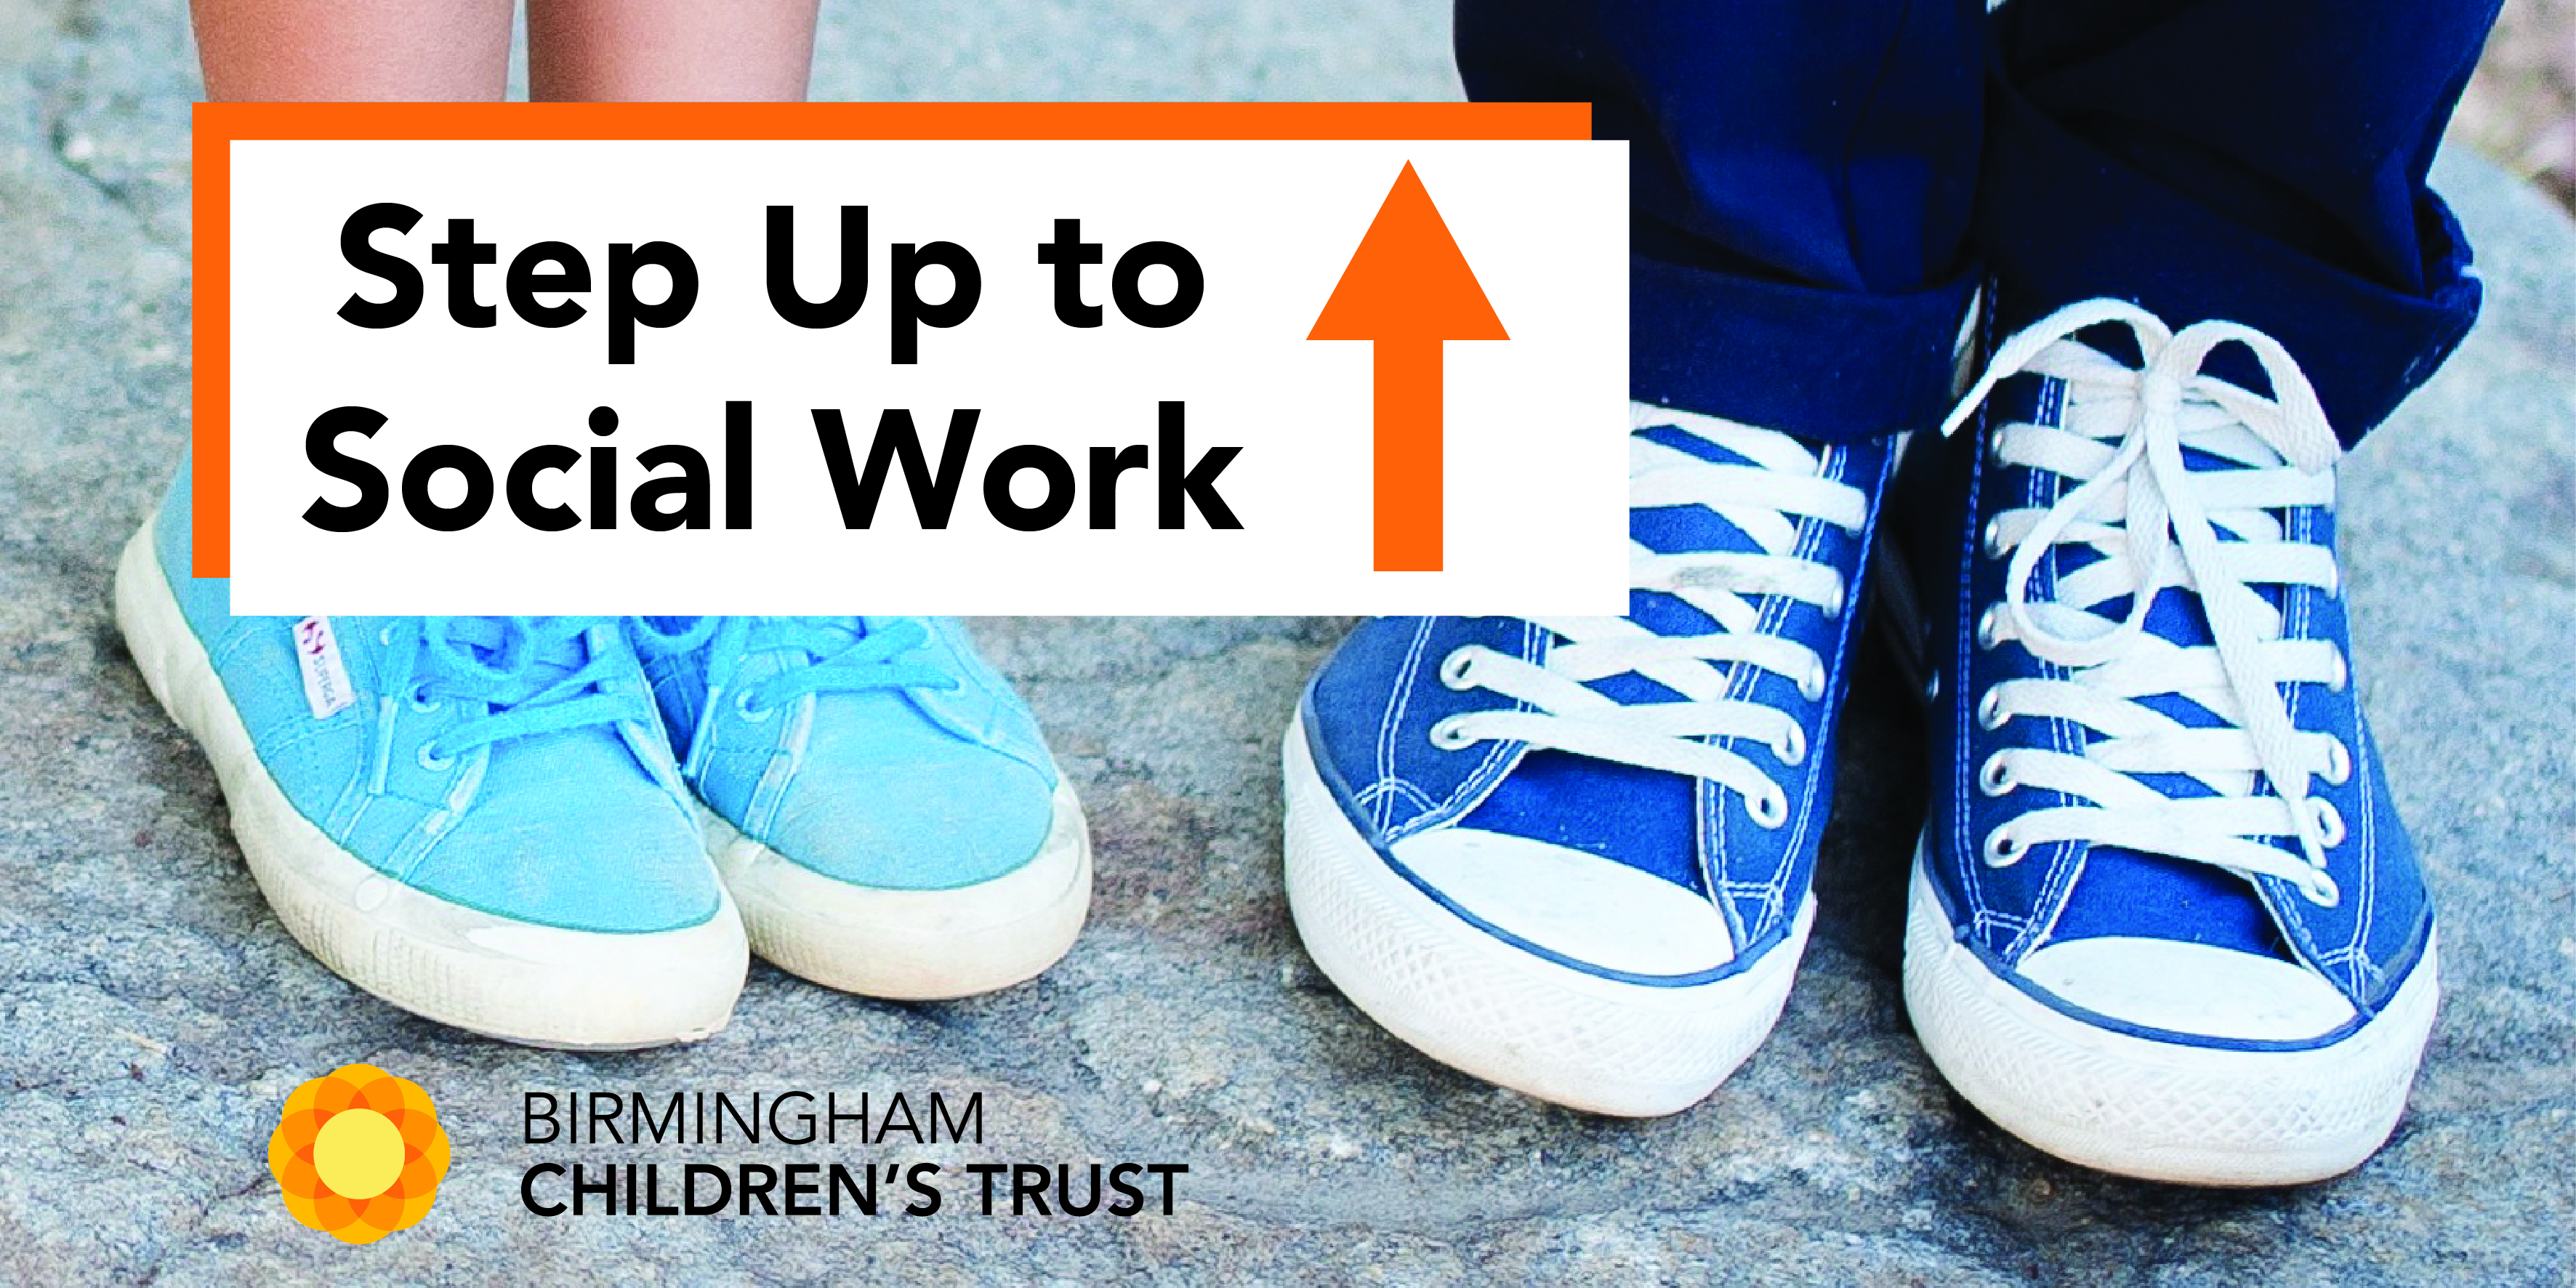 Step Up to Social Work